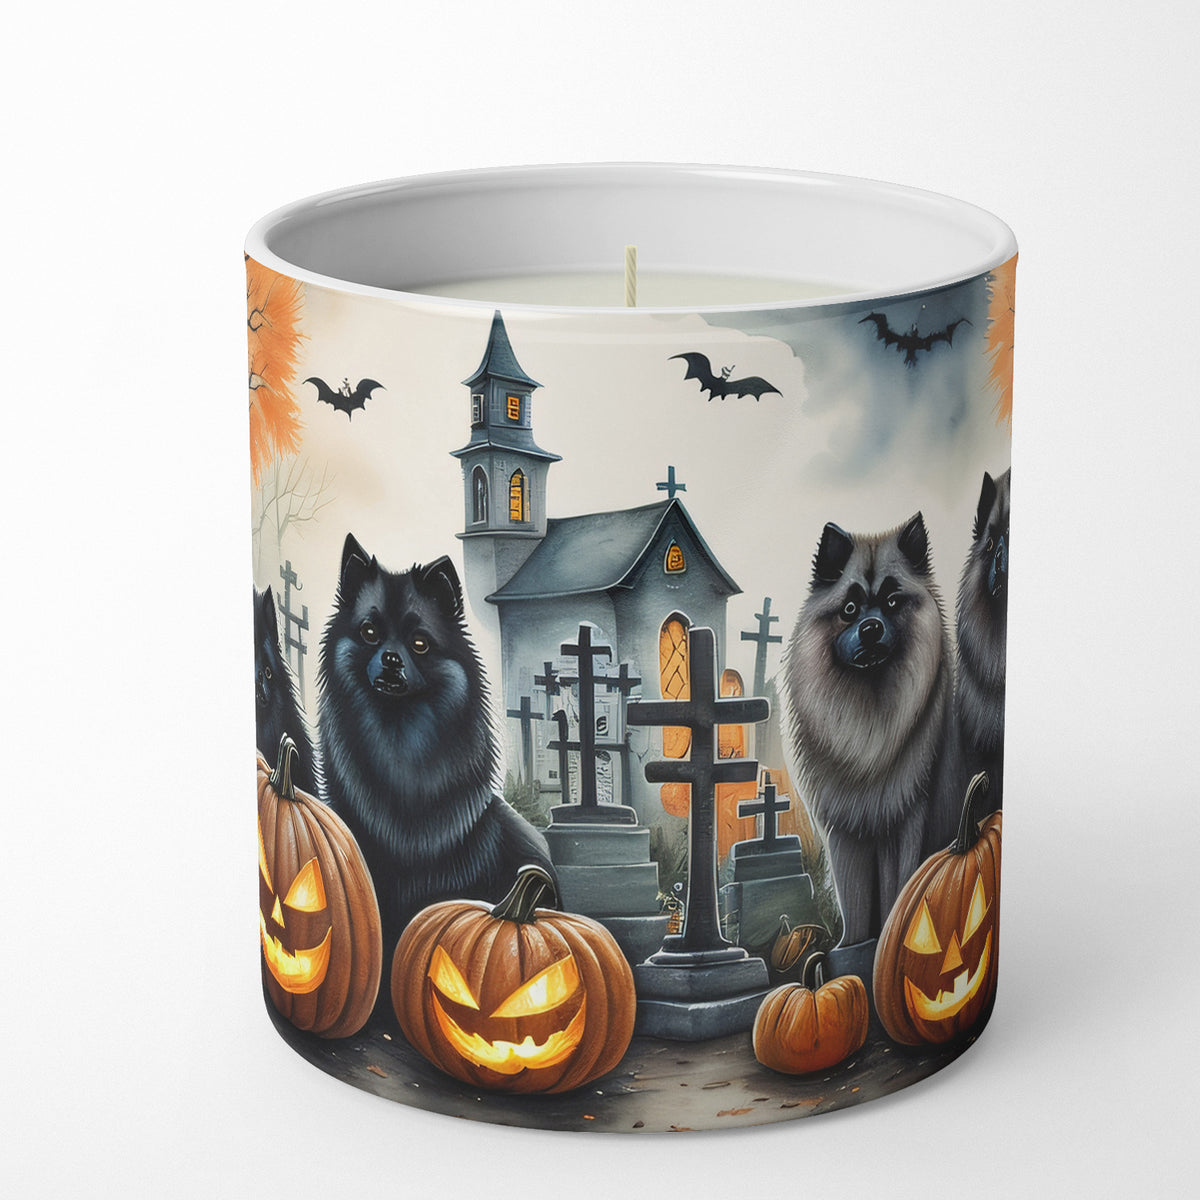 Buy this Keeshond Spooky Halloween Decorative Soy Candle